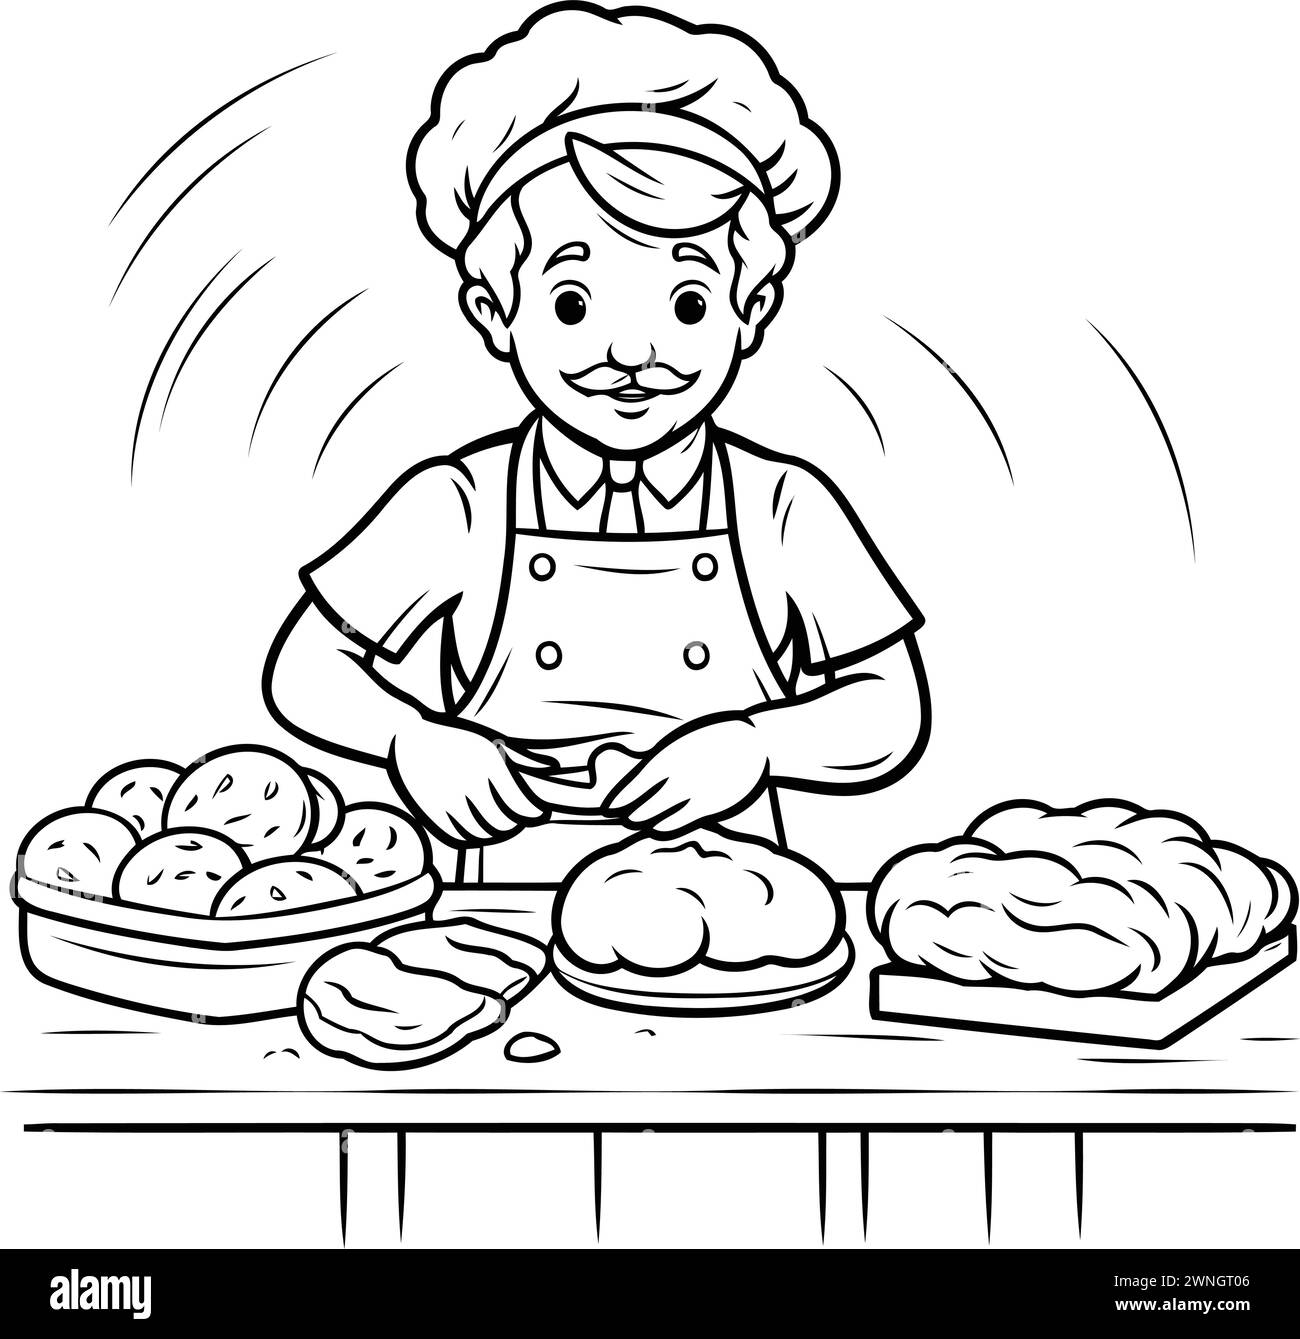 Black and White Cartoon Illustration of Bakery Chef with Baking Bread for Coloring Book Stock Vector